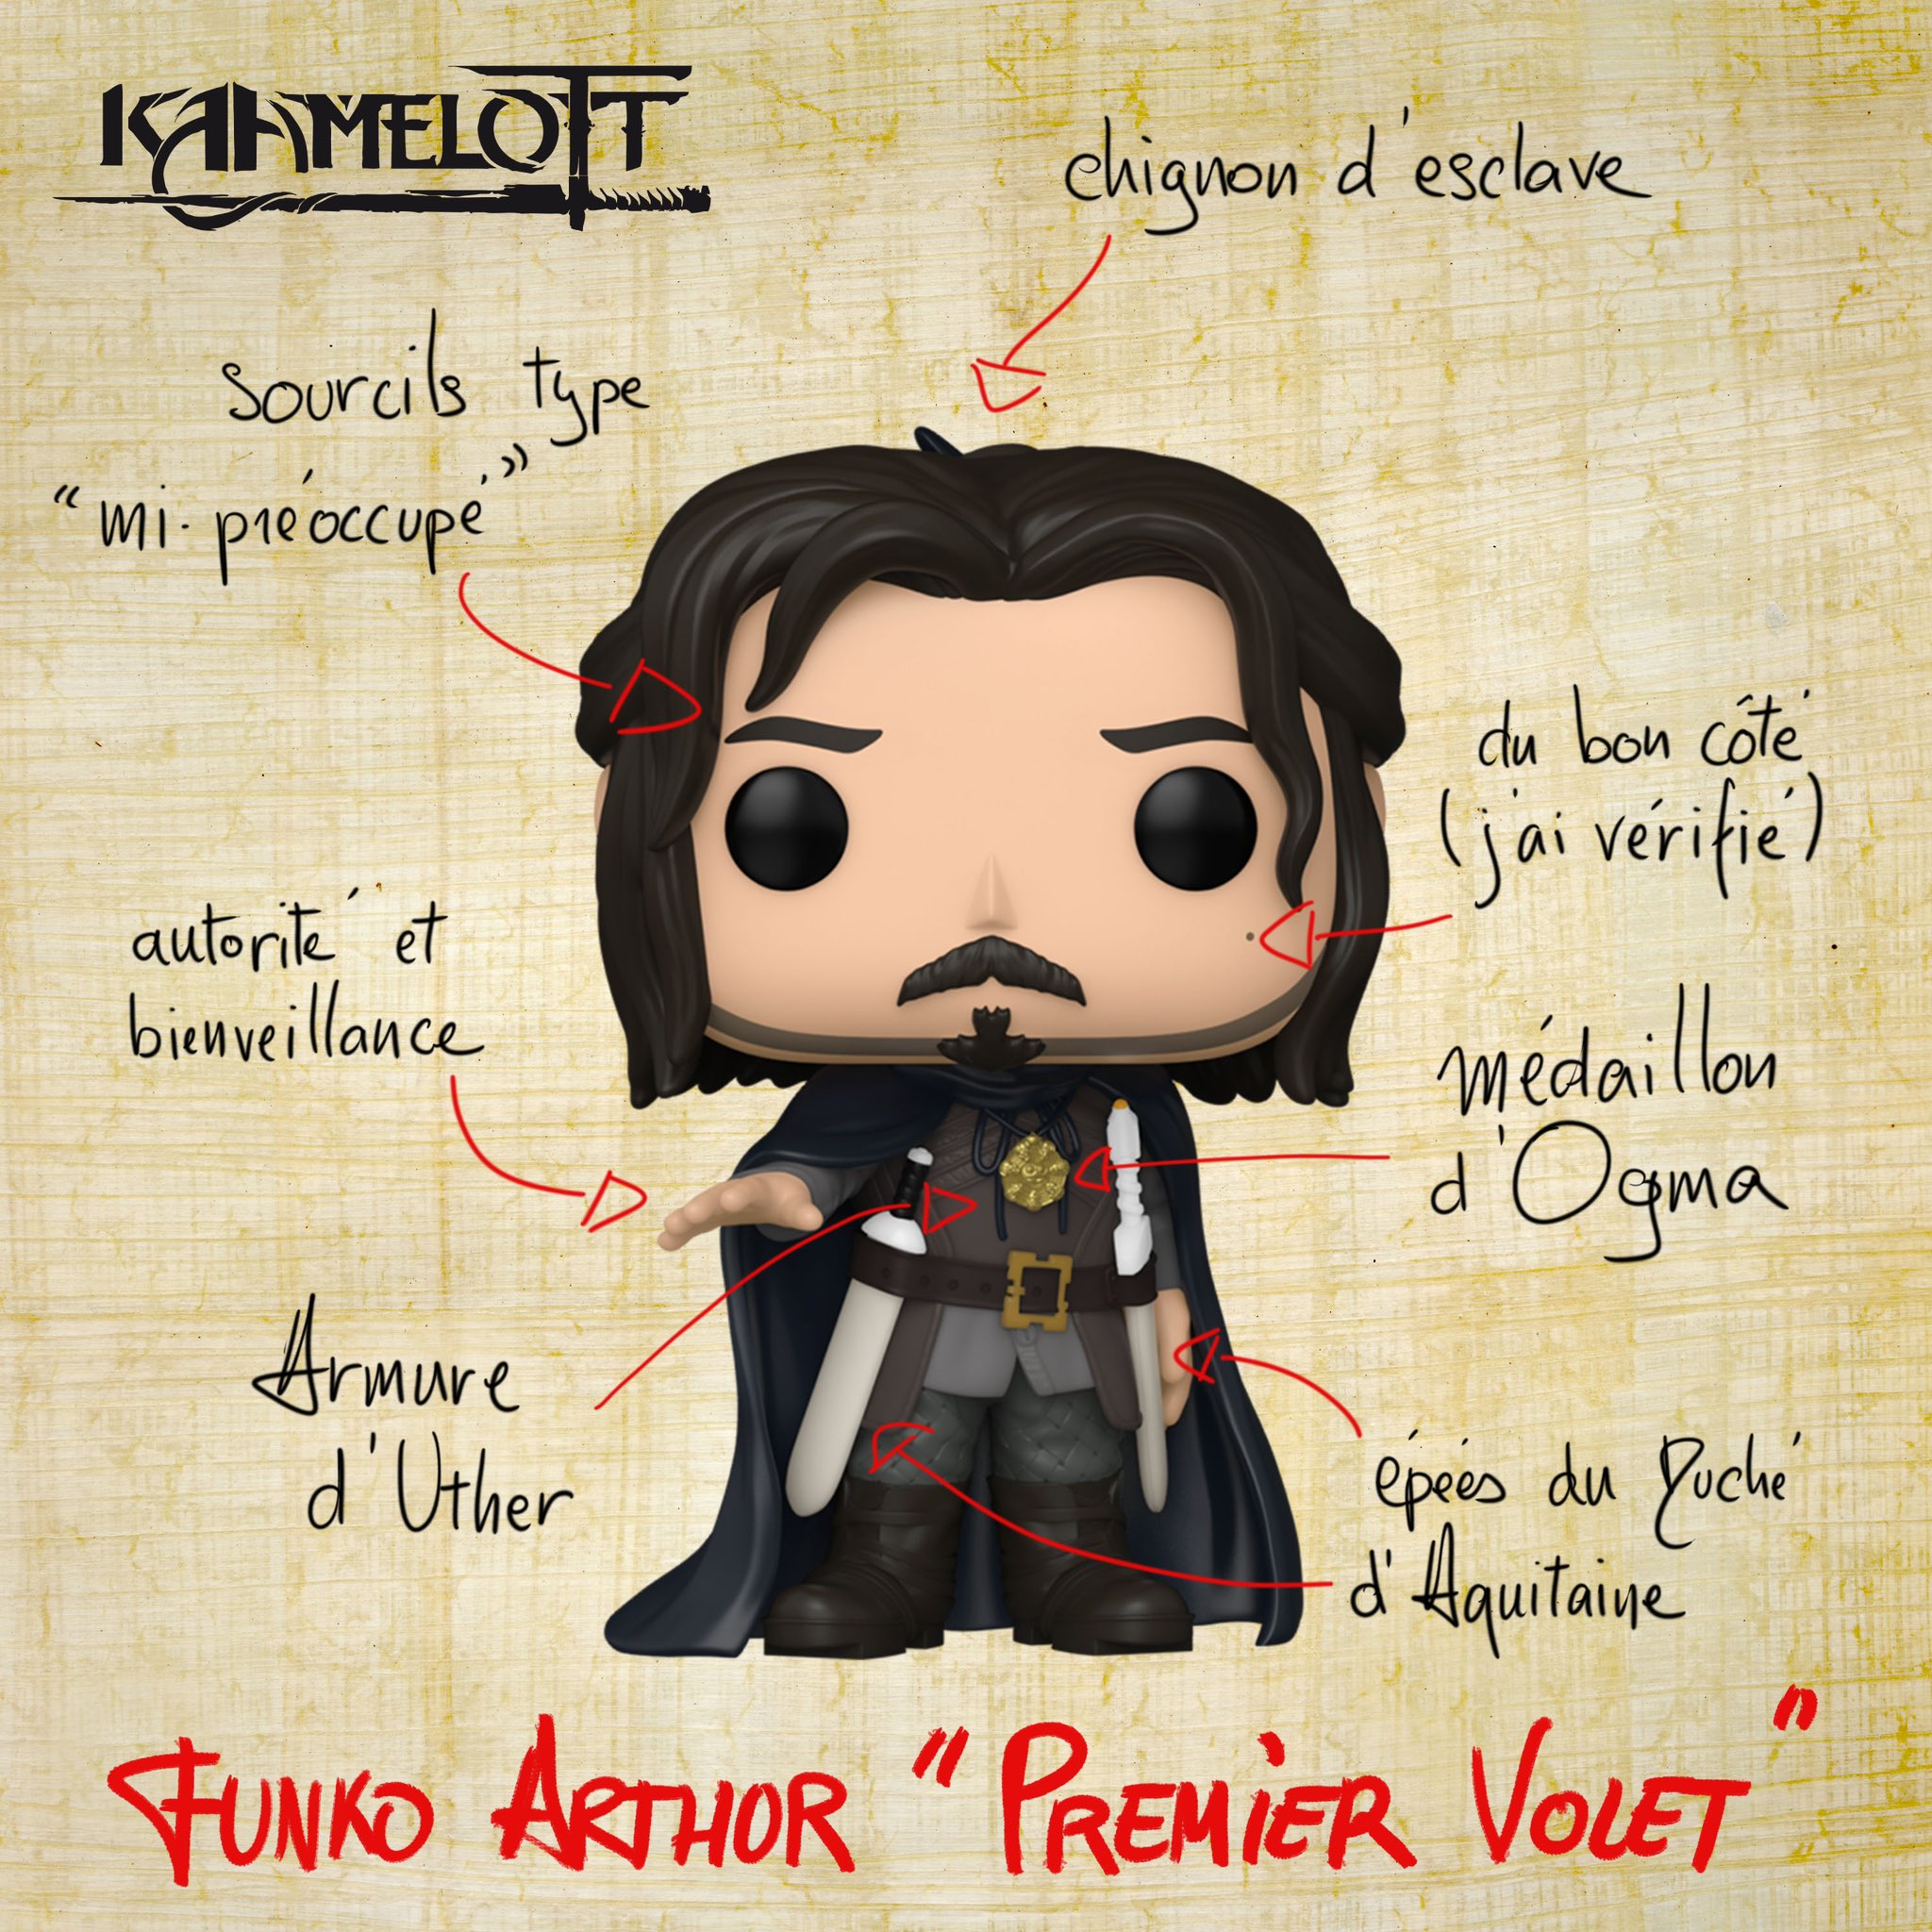 Alexandre Astier has made official the first POP of Kaamelott (french movie)